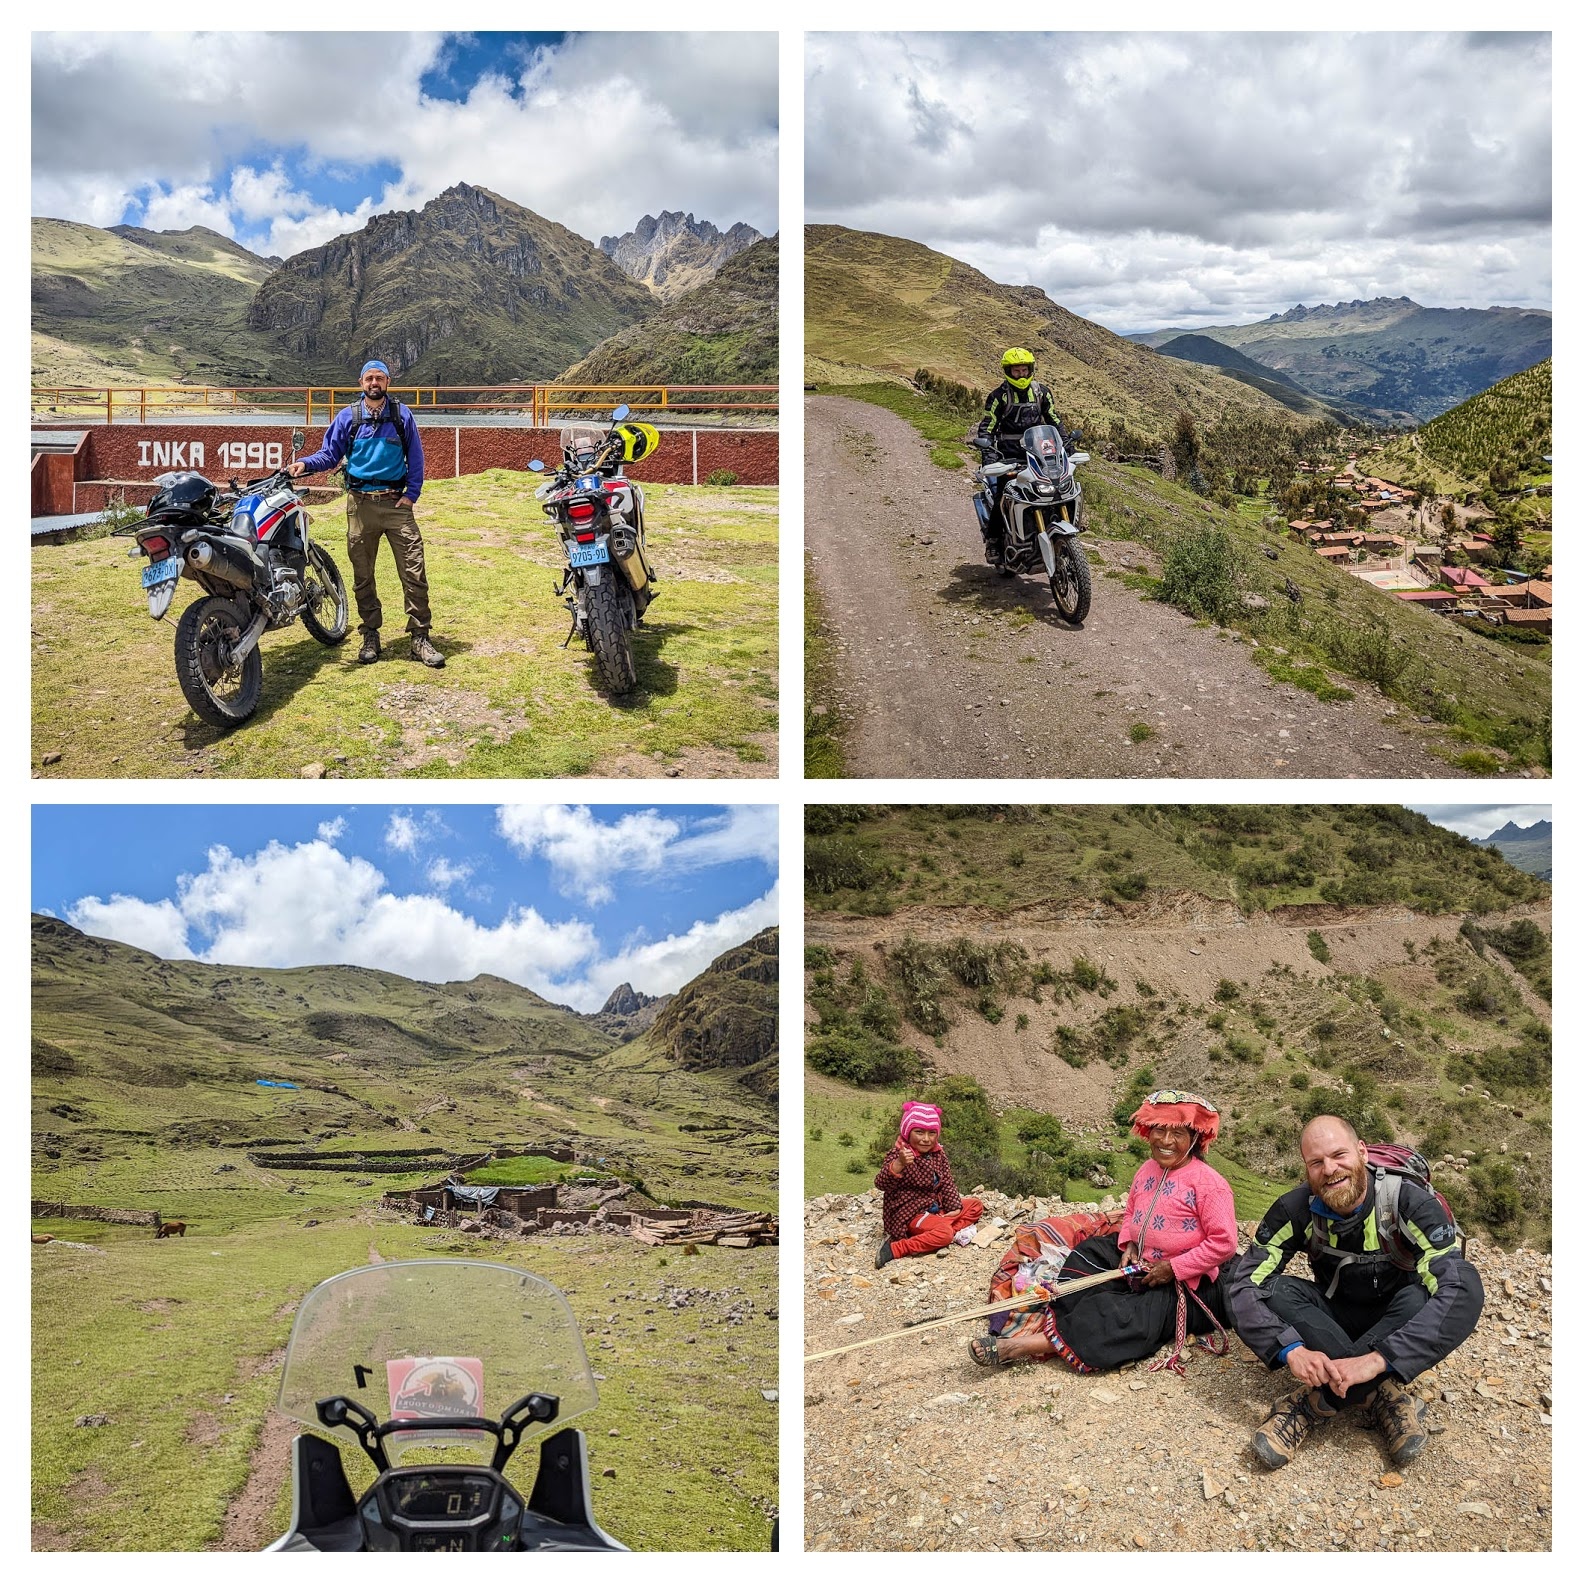 Collage from riding the Honda Africa Twin around the mountains near Pisac